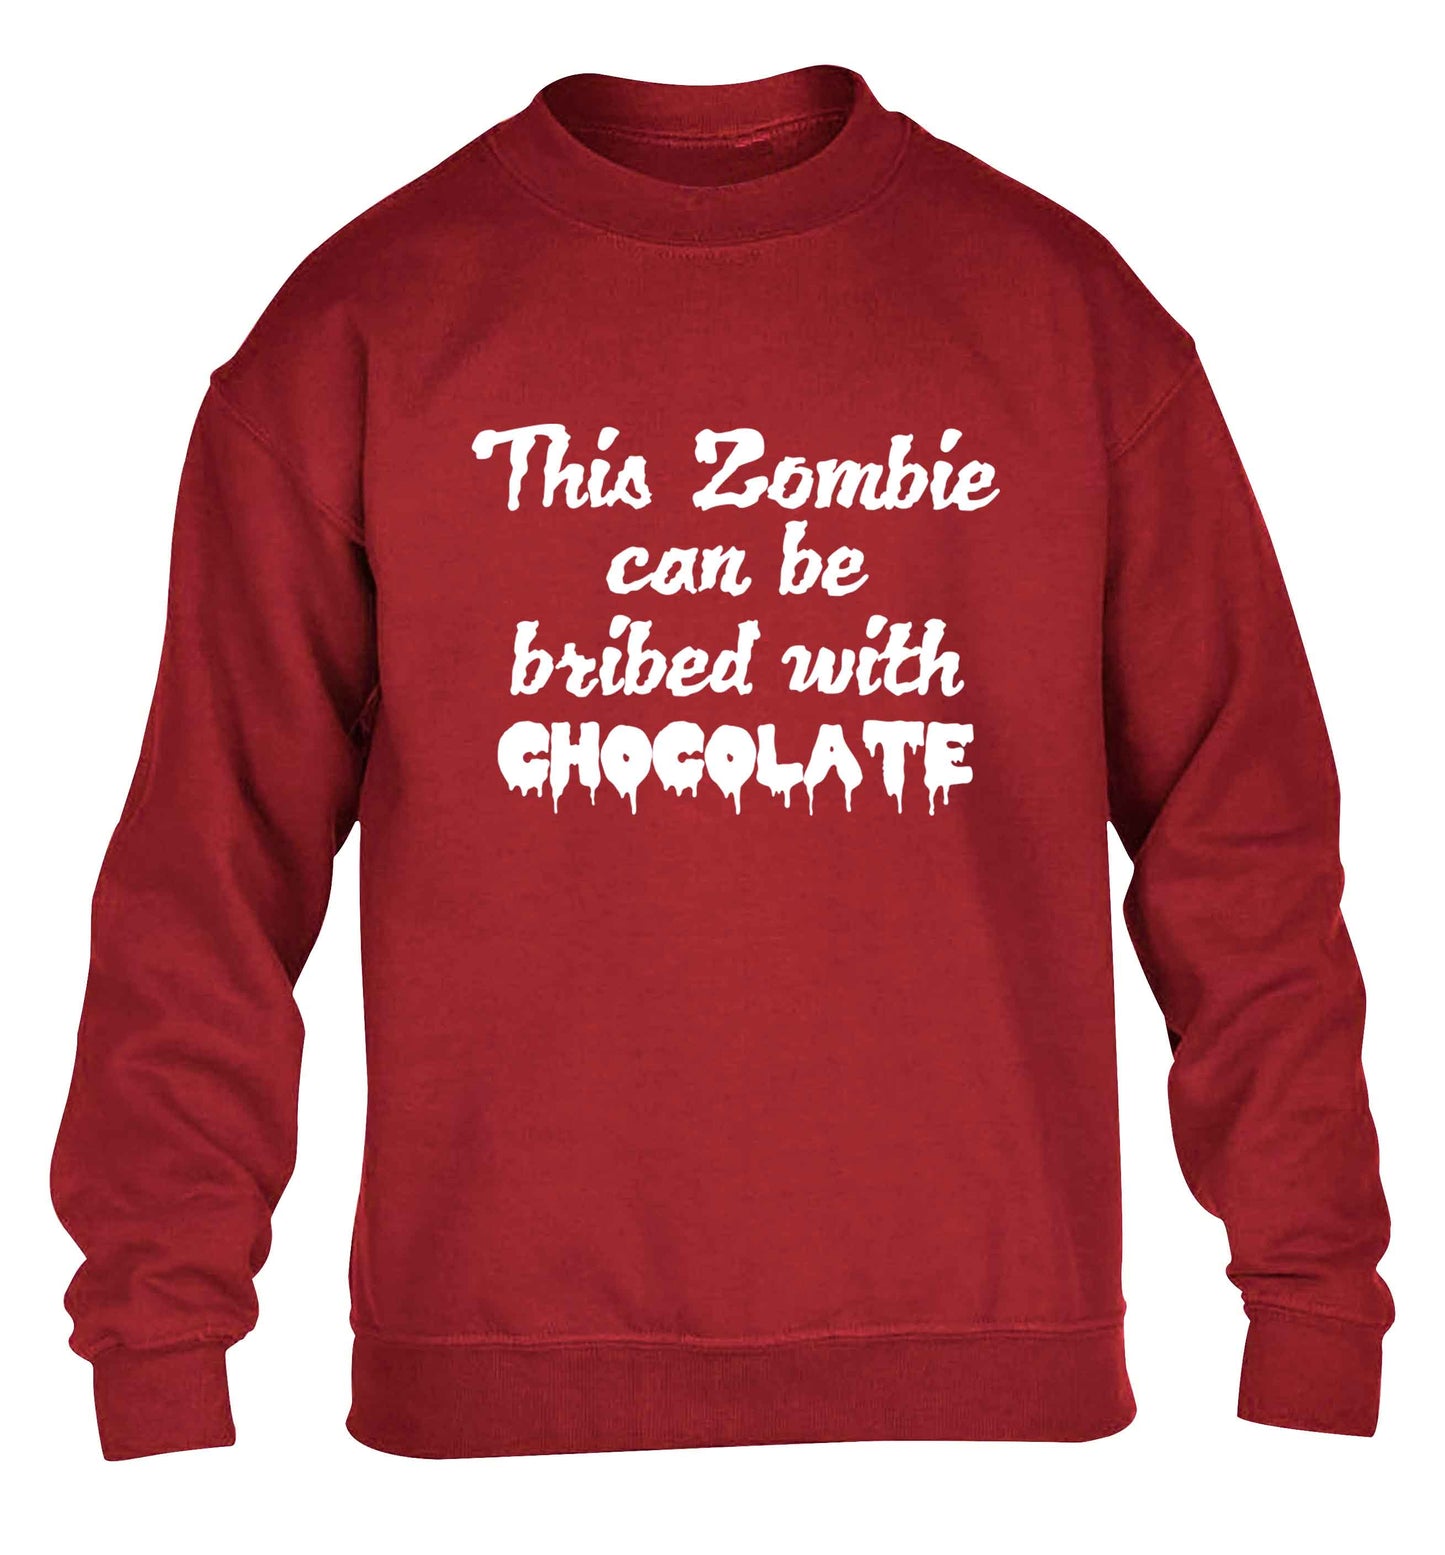 This zombie can be bribed with chocolate children's grey sweater 12-13 Years